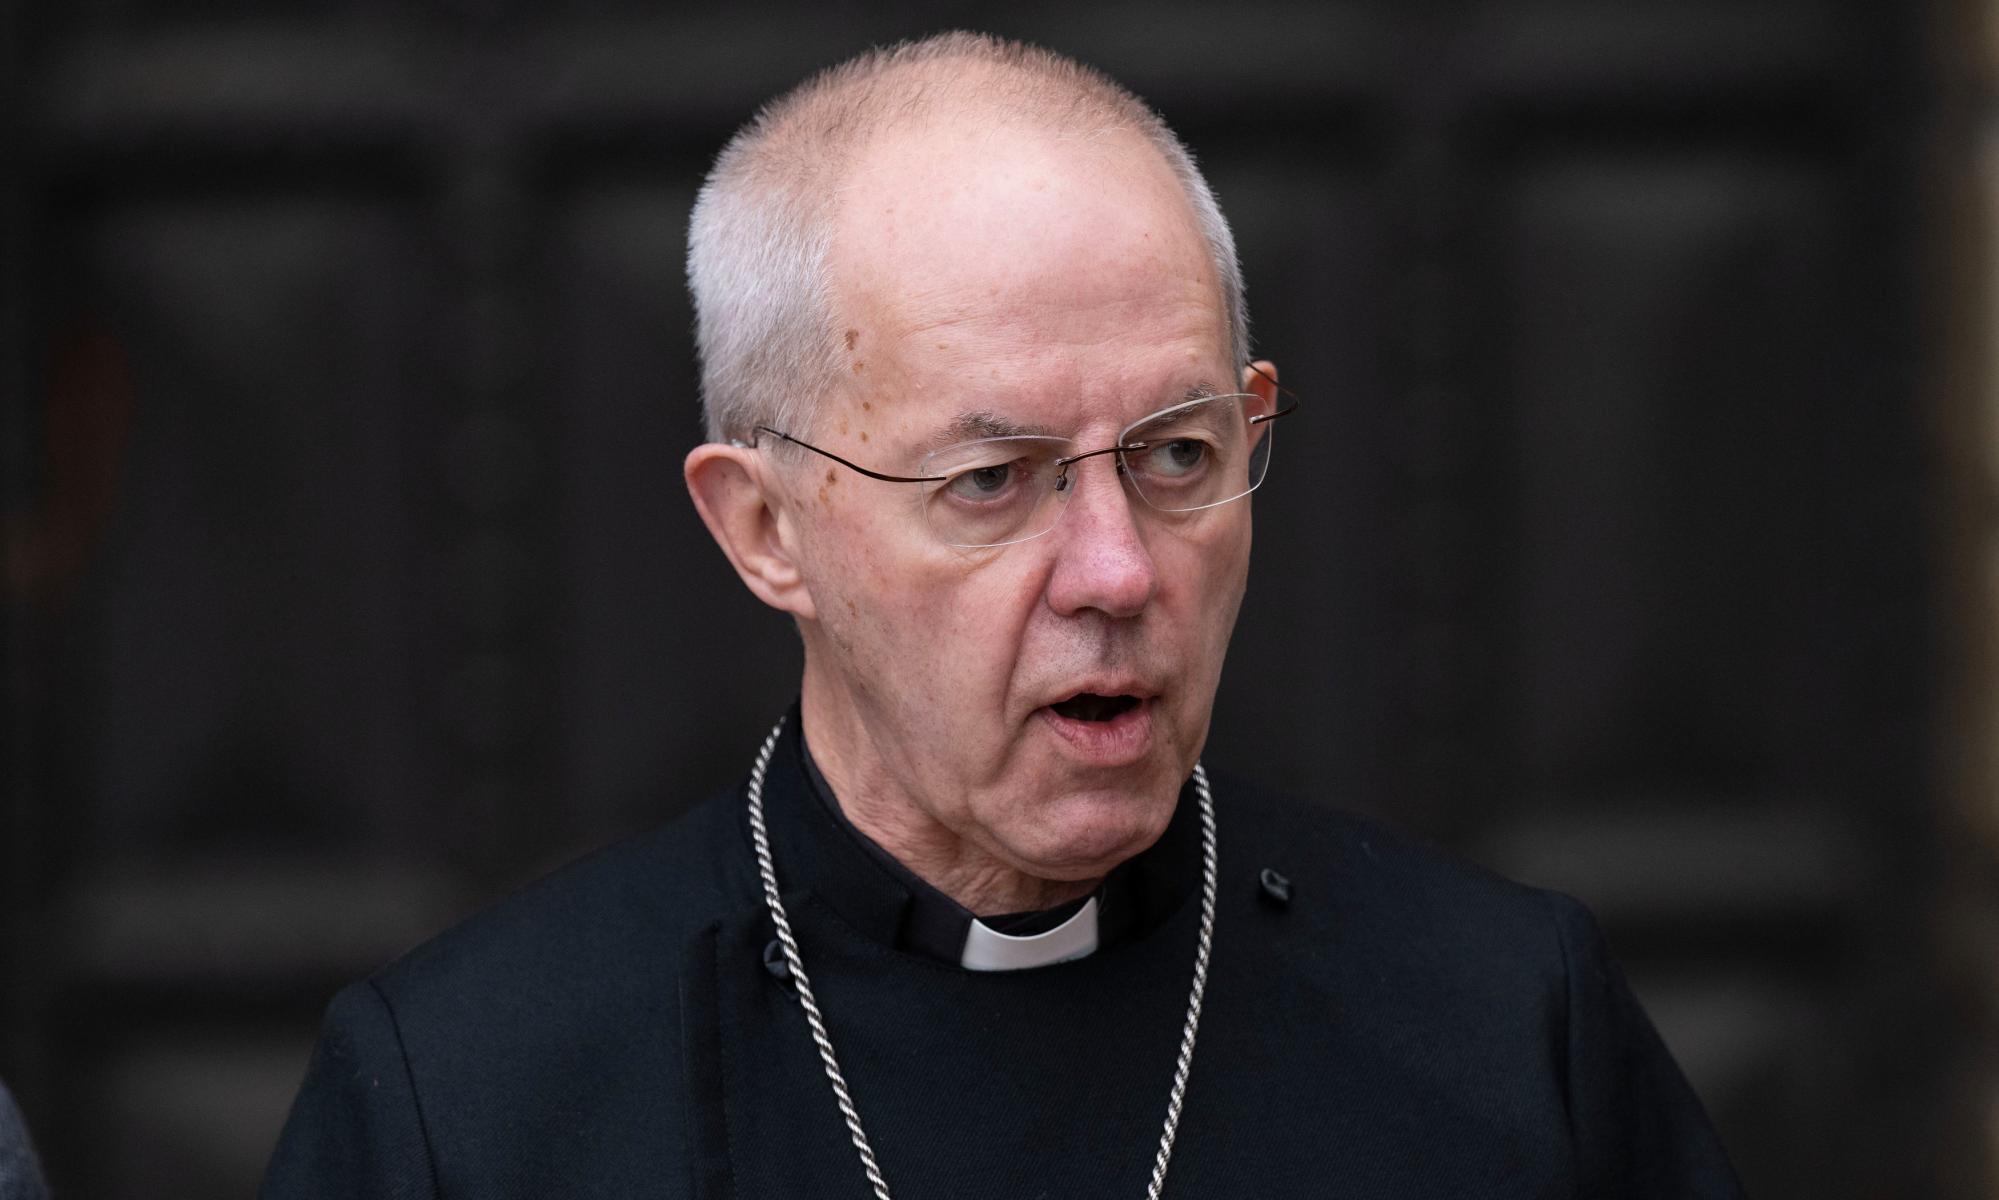 justin welby expresses ‘deep regret’ at refusal to meet palestinian pastor